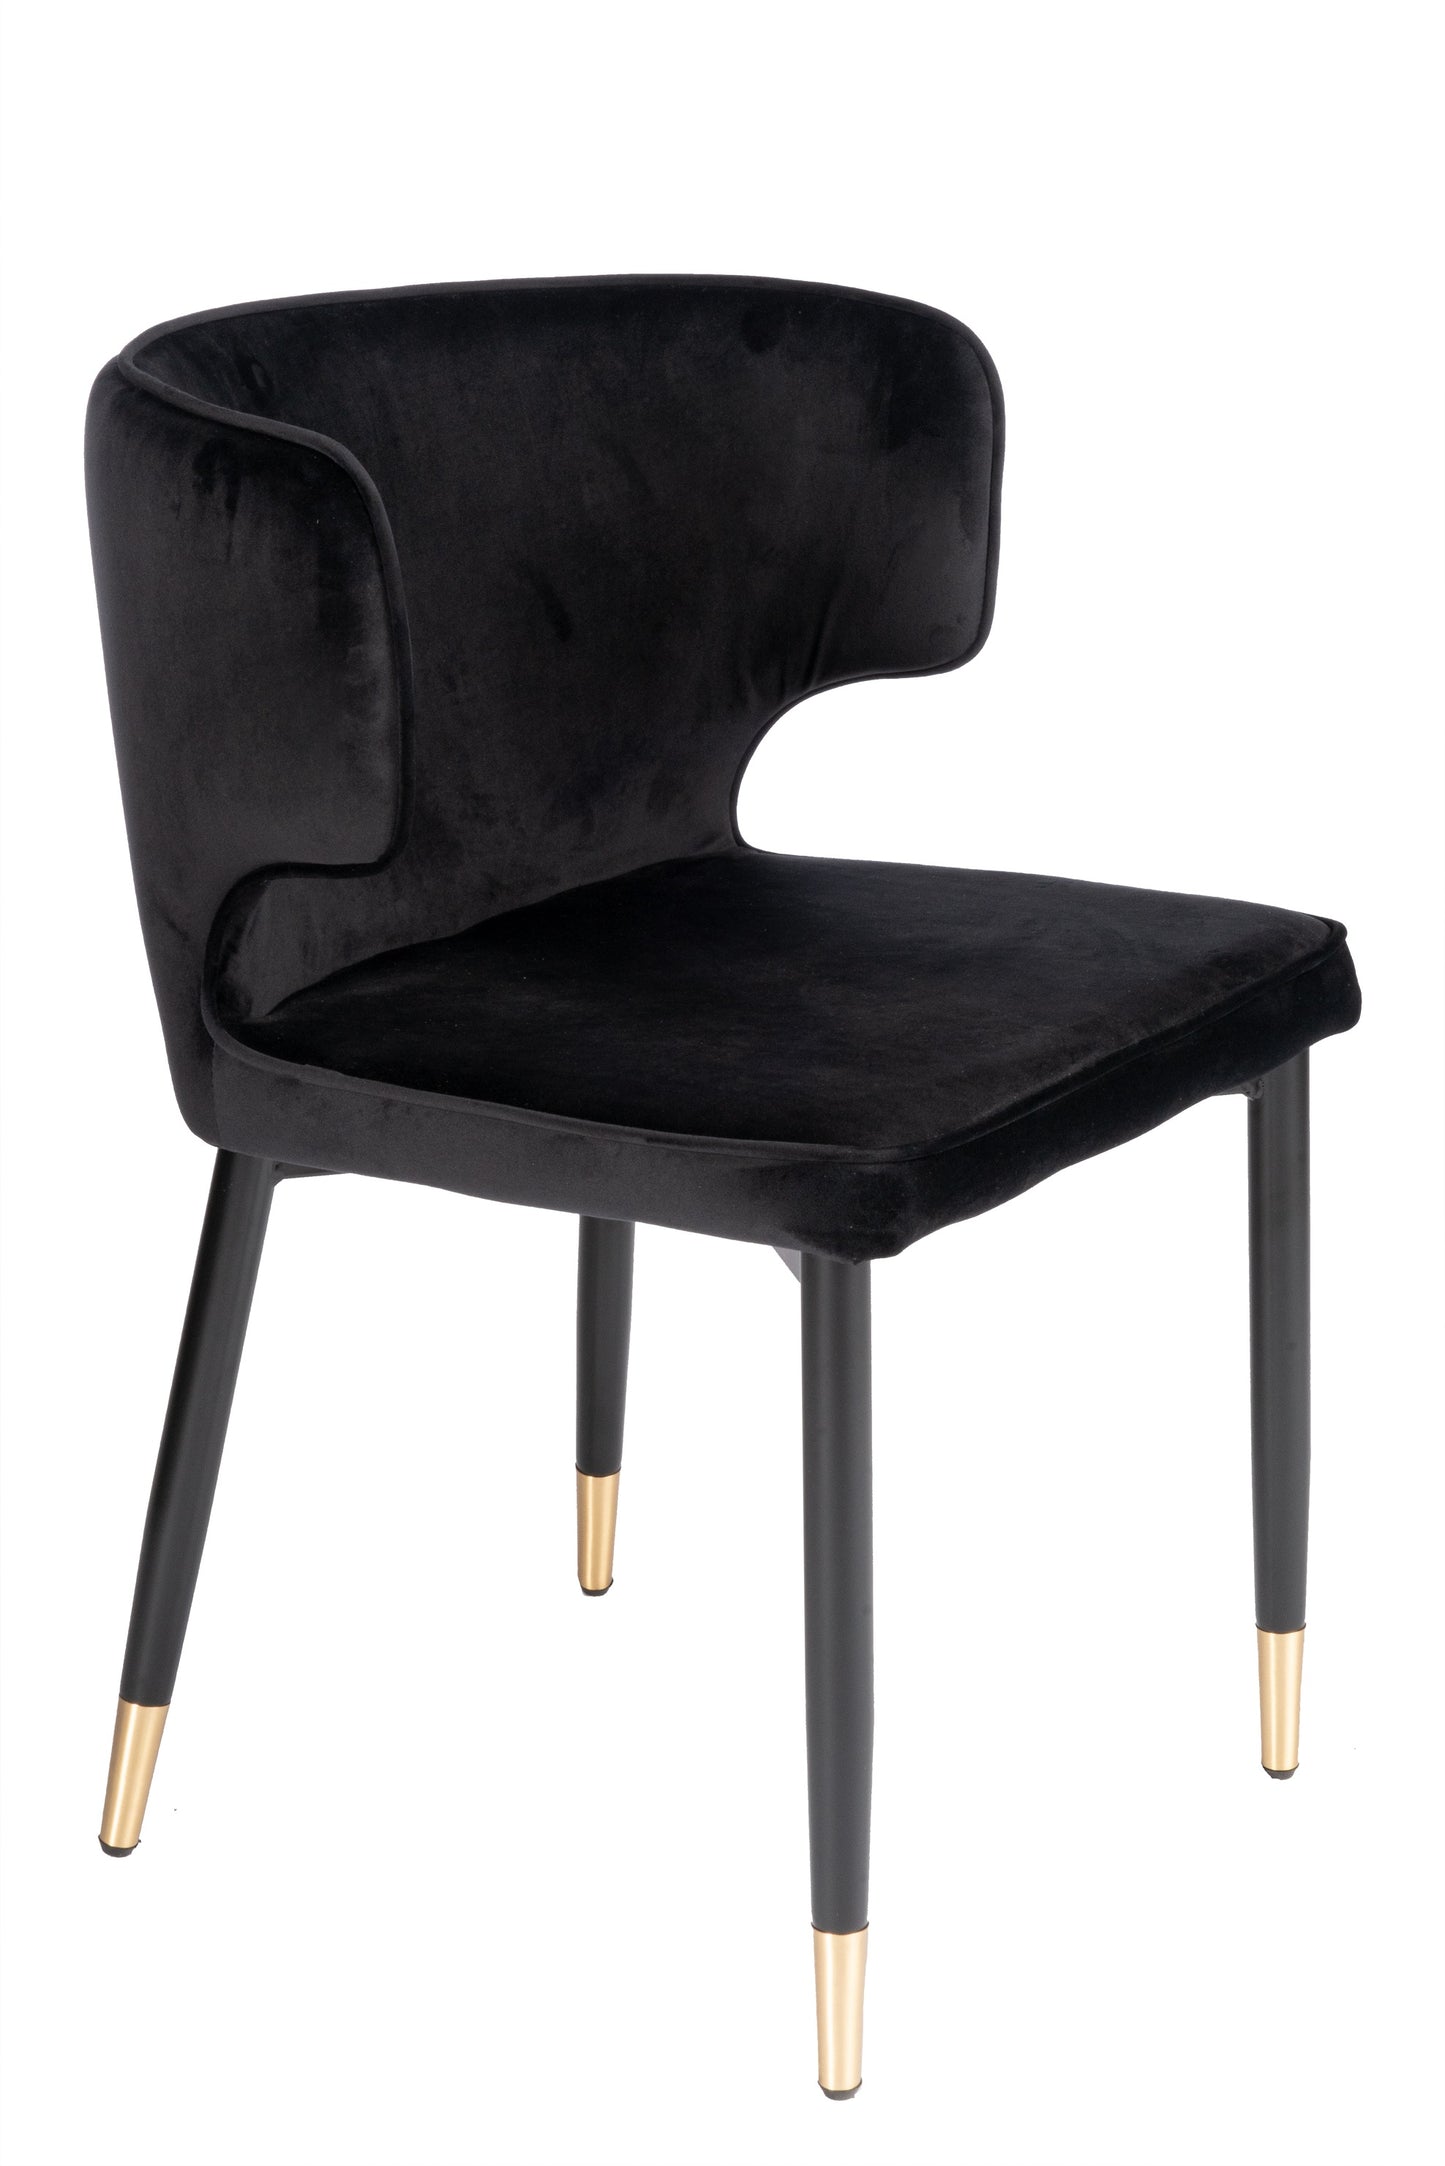 gold and black dining chair